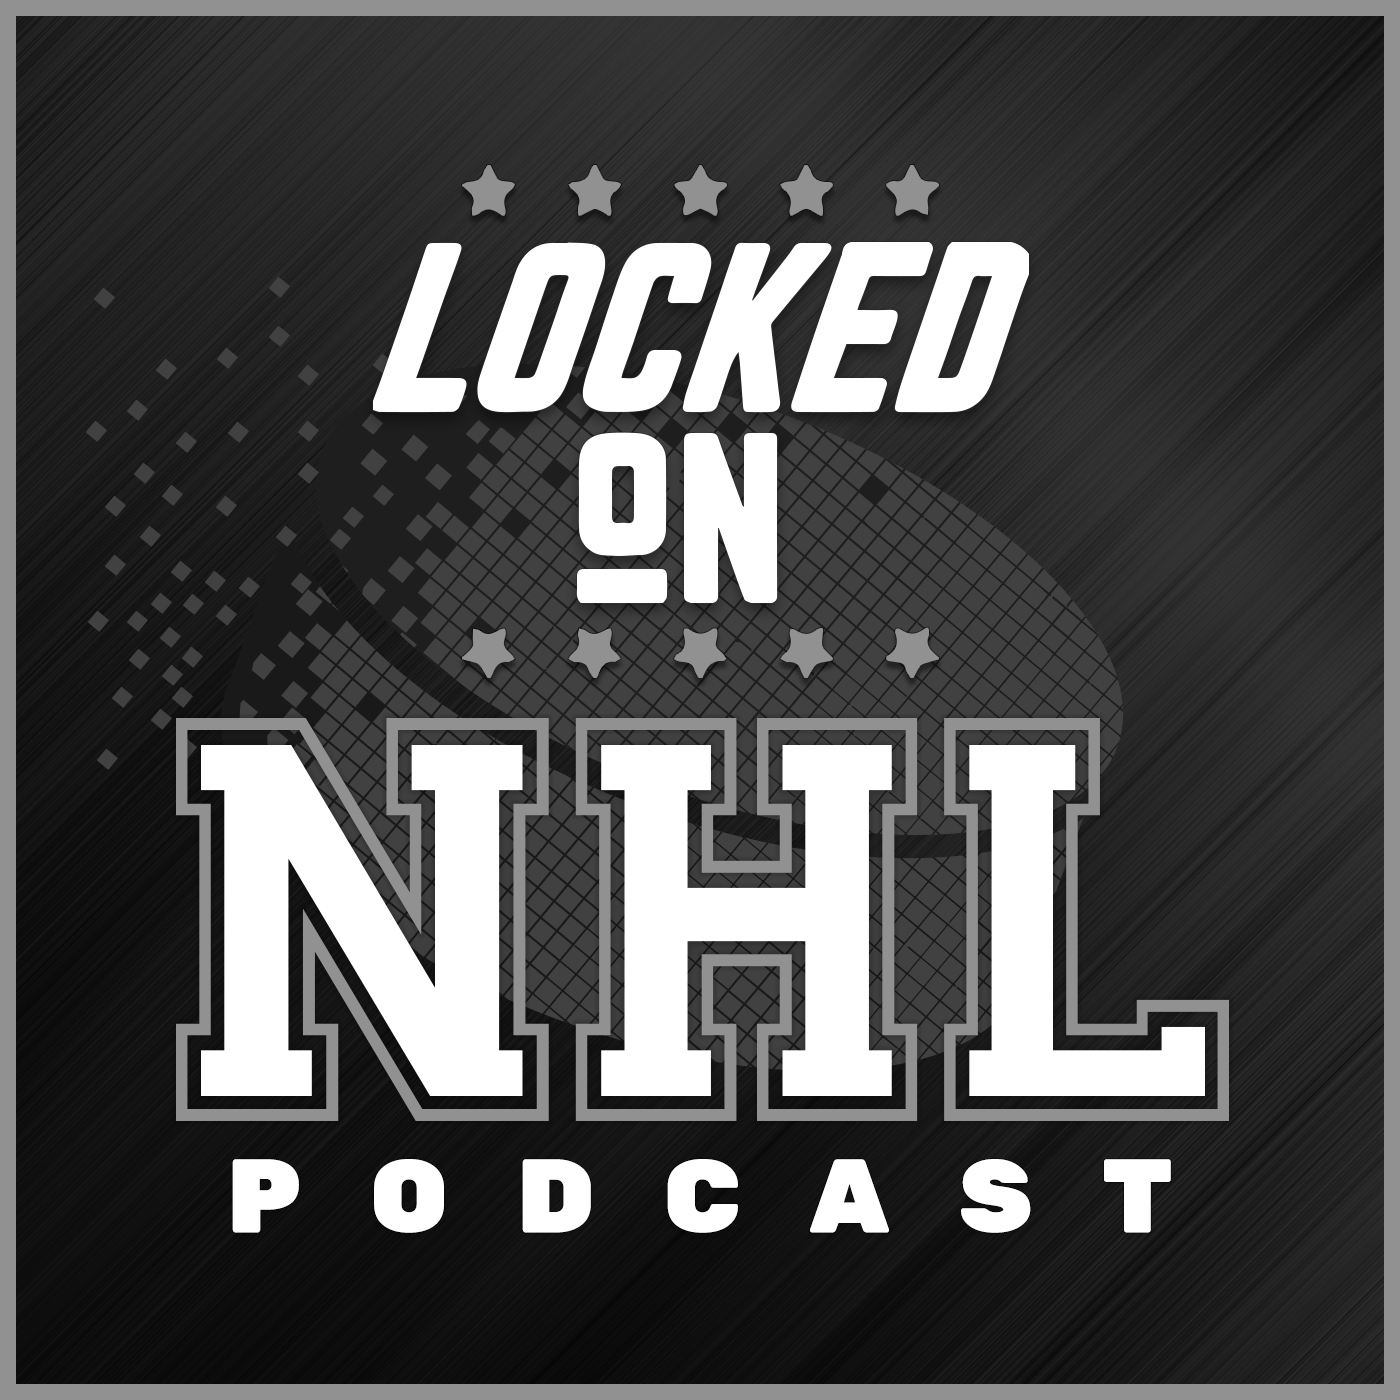 Eastern Conference NHL Season Preview: Bruins, Panthers, Red Wings, Canadiens : Every Wednesdaycomma Ross Levitan Locked On Senators and Mike DiStefano Locked On Maple Leafs cover all the biggest stories from the NHLs Eastern Conference  Birddogs Go tobirddogscom/LOCKEDONNHLor enter promo code LOCKEDONNHL for a free water bottle with any order You wont want to take your birddogs off we promise you FanDuel This episode is brought to you by FanDuel Sportsbookcomma Official Sportsbook of Locked On Make Every Moment MoreRight nowcommaNEWcustomers can bet FIVE DOLLARS and getTWO HUNDREDin BONUS BETS GUARANTEEDVisitFanDuelcom/LOCKEDONto get started Jase Medical Todays episode is brought to you by Jase Medical Empower yourself when you purchase a Jase Casecomma providing you with a personal supply of 5 antibiotics that treat 50 infections Get yours today atjasemedicalcomcomma thats JASEmedicalcom Learn more about your ad choices Visit podcastchoicescom/adchoices